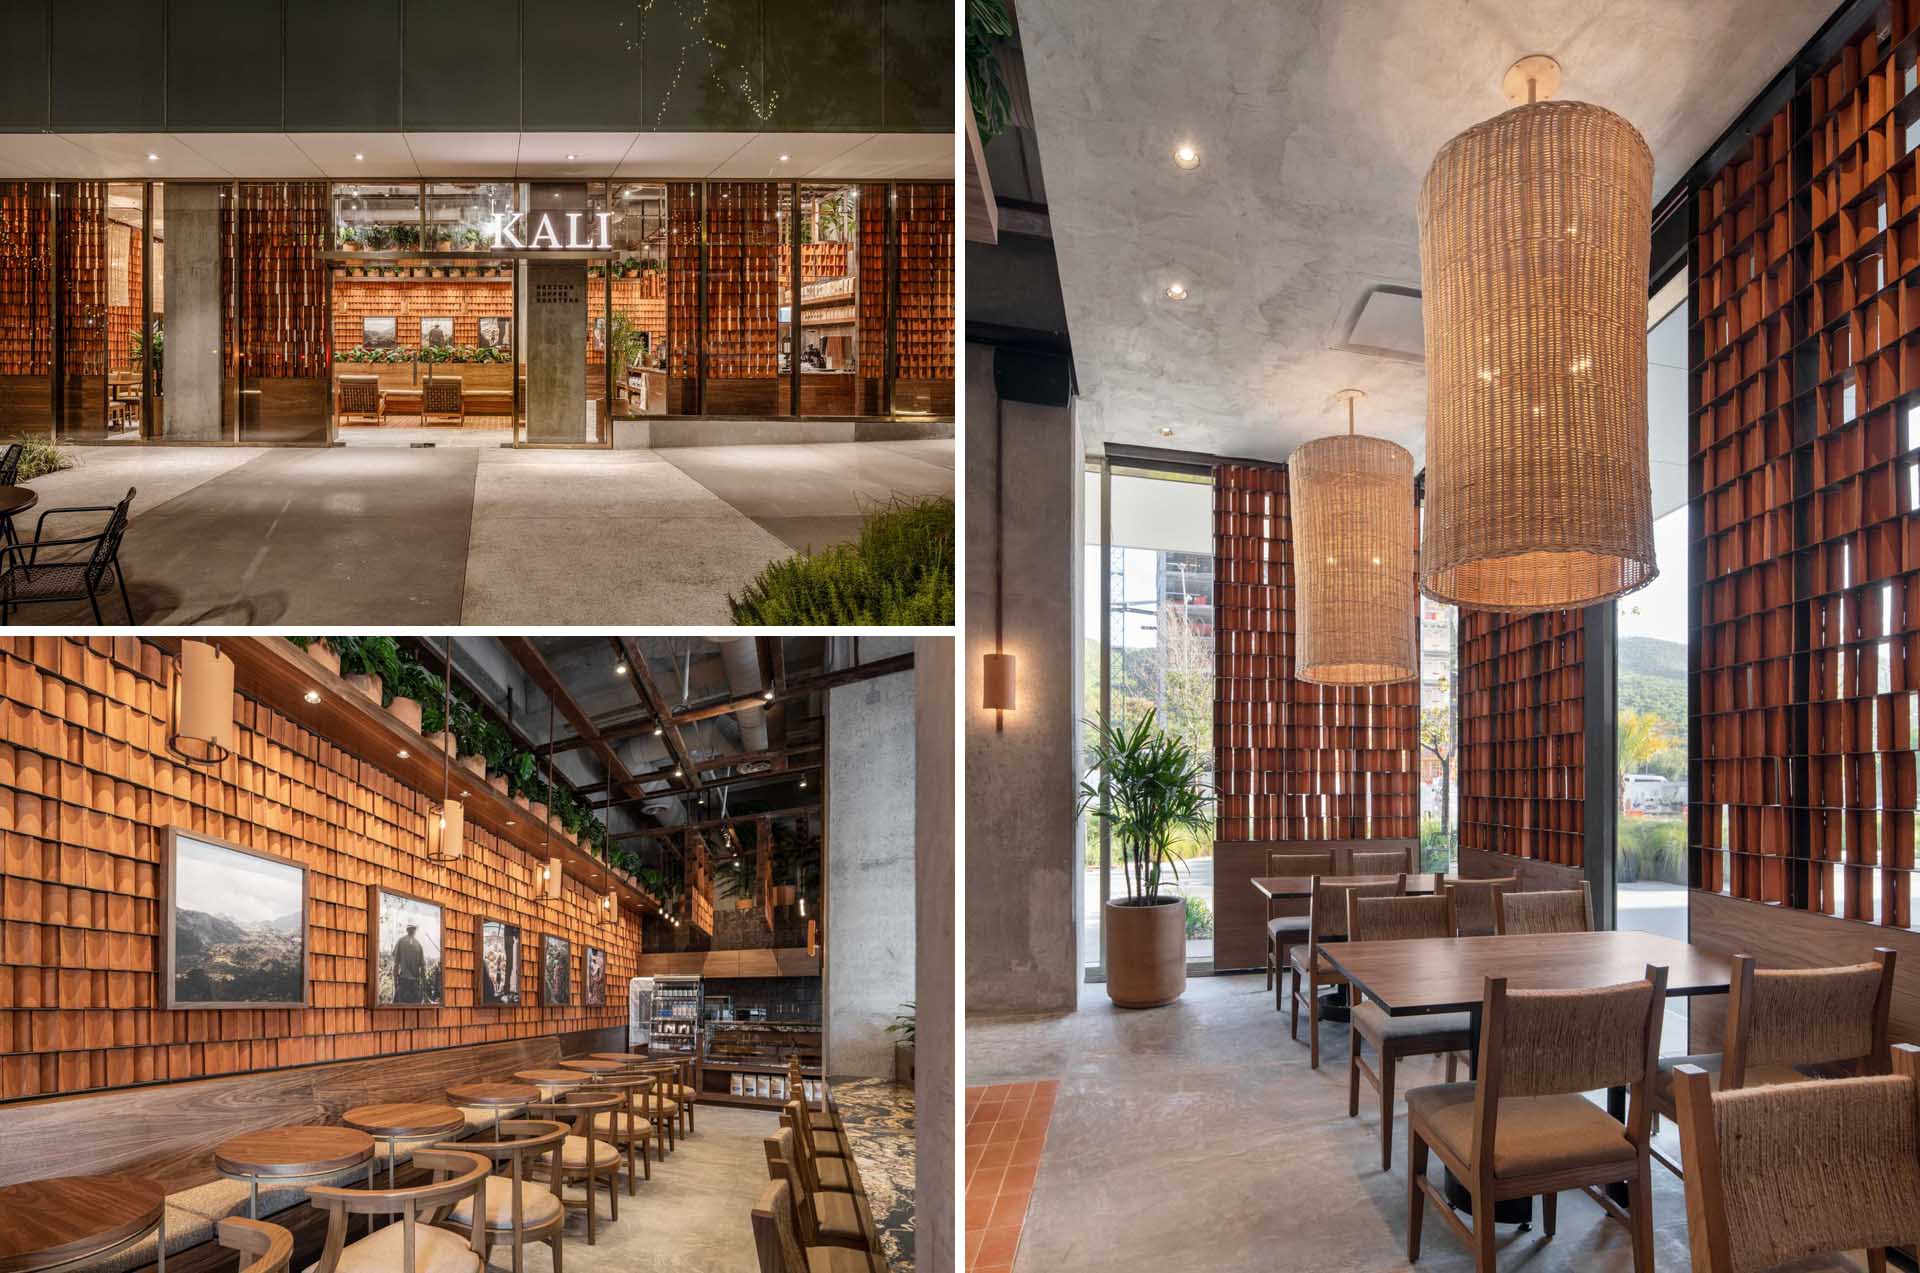 Clay tiles are used heavily in the design of this modern coffee shop.